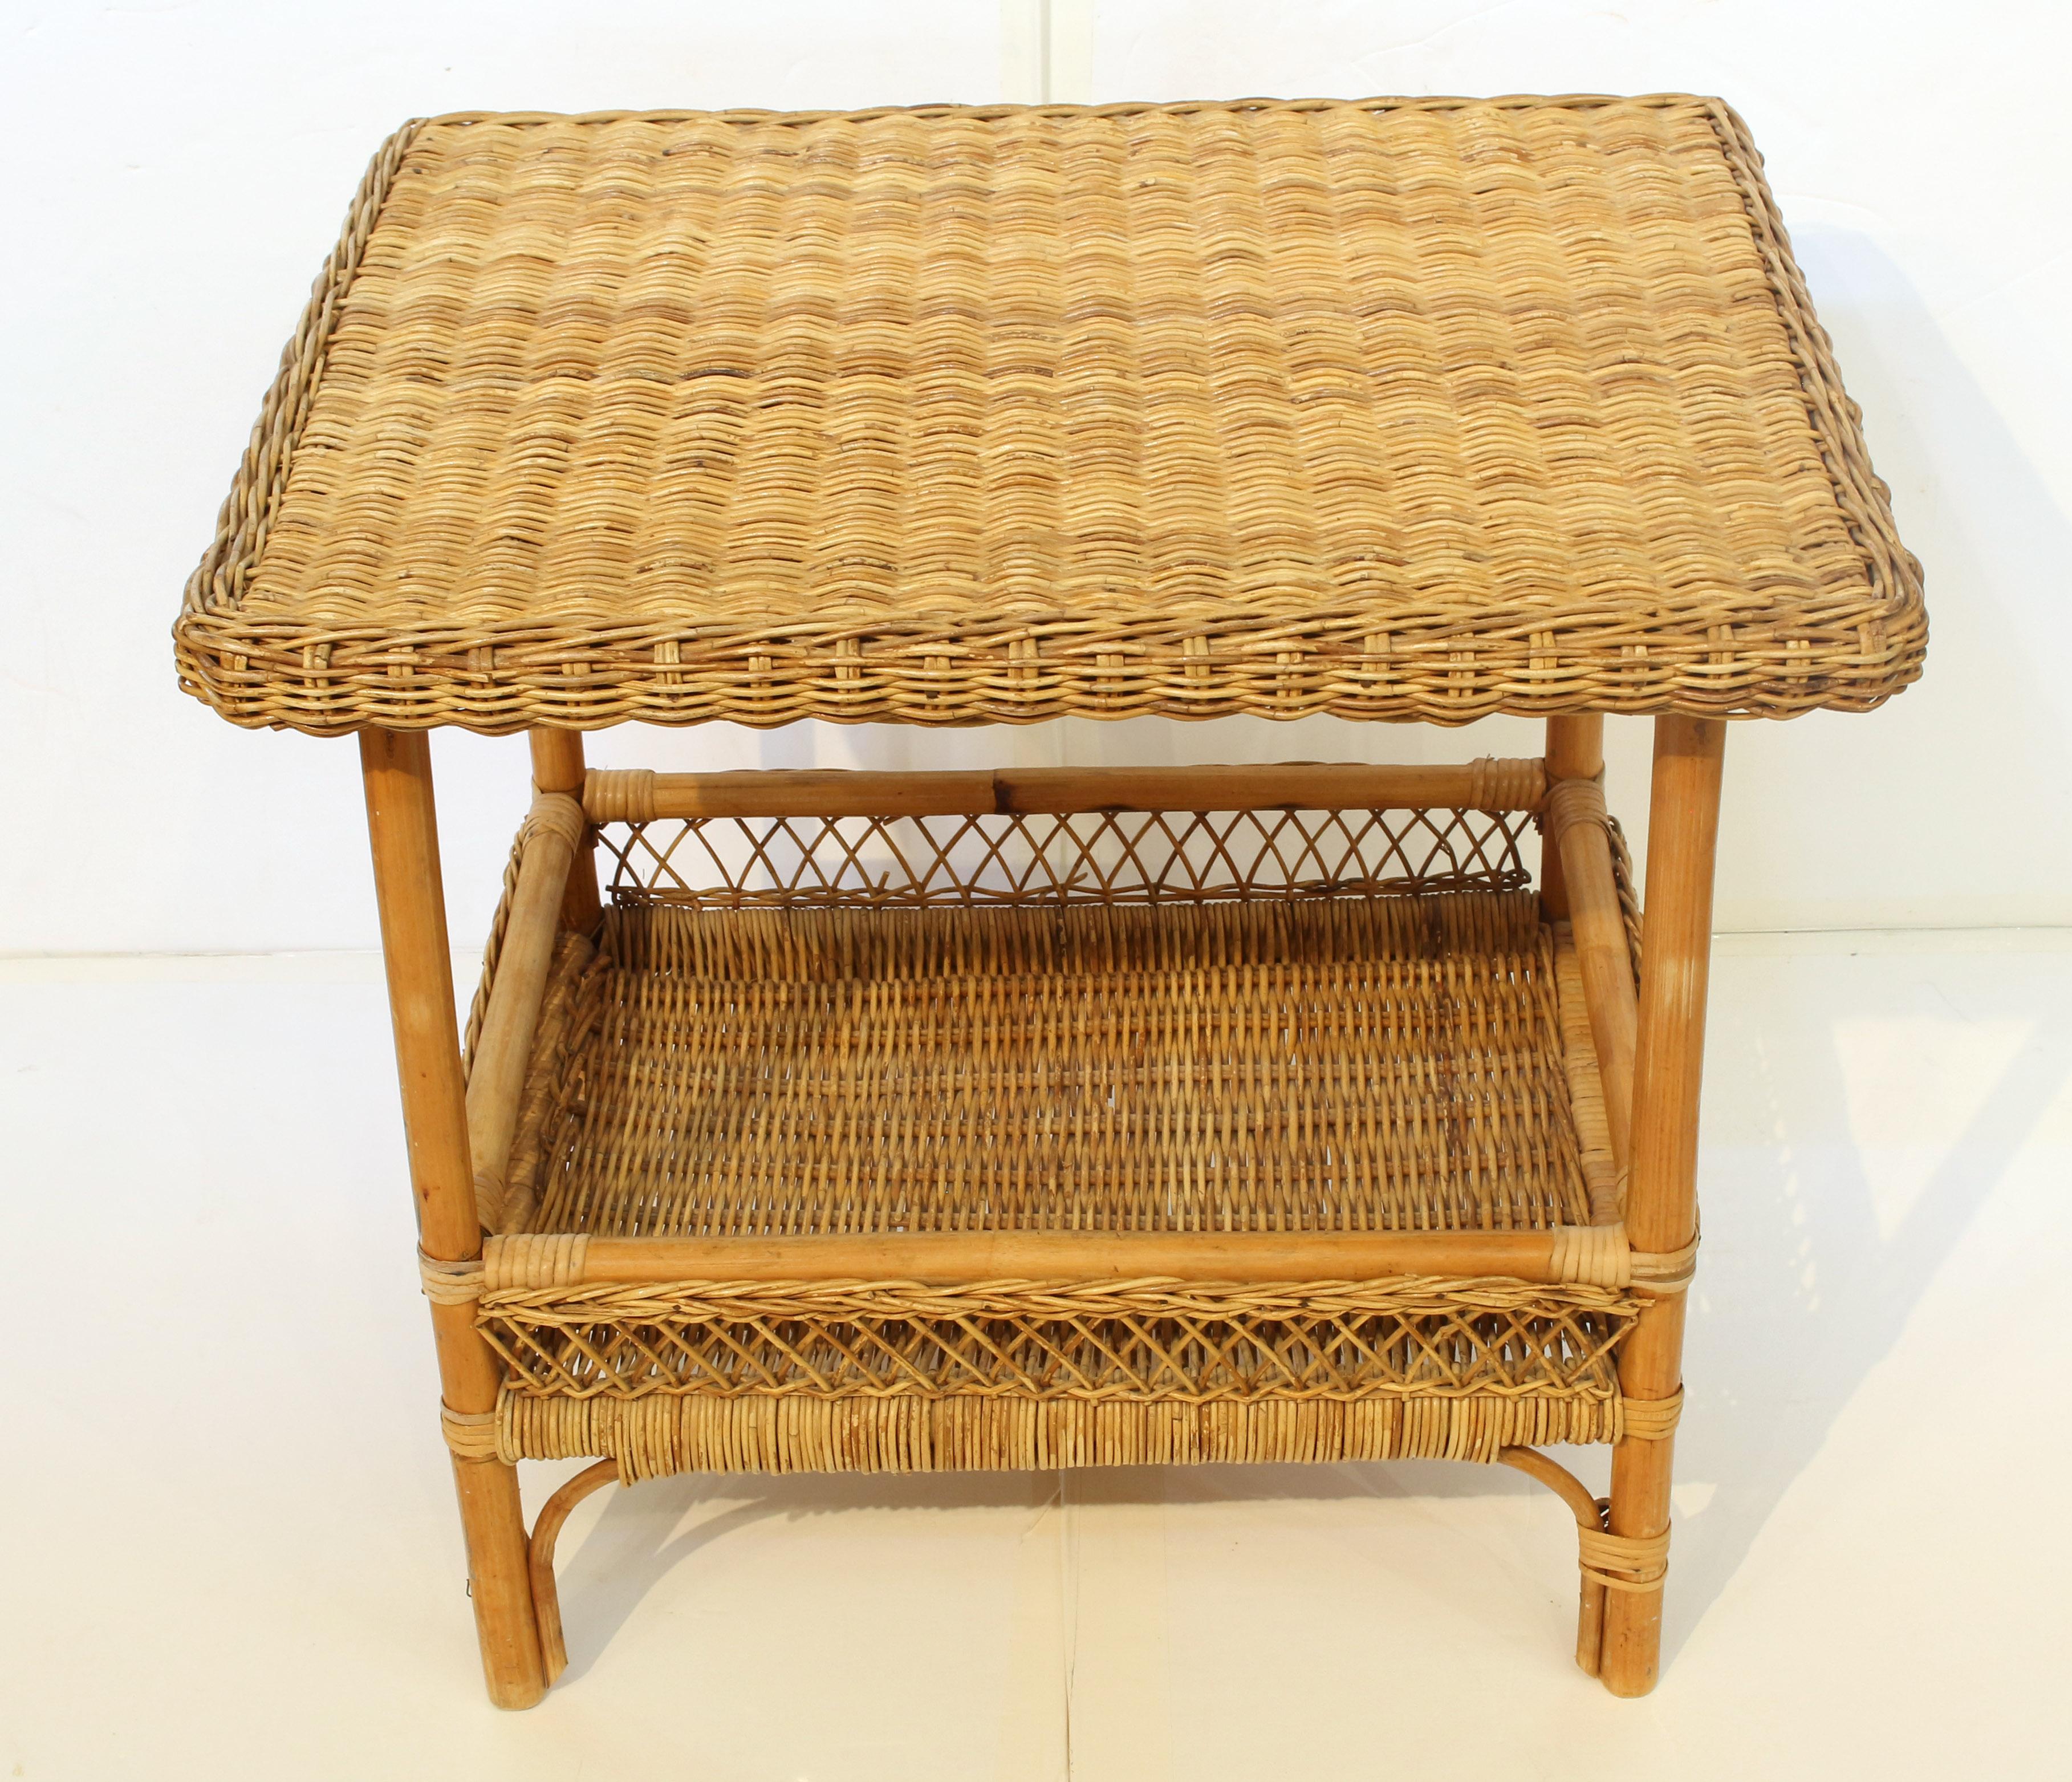 Circa 1980s woven rattan 2-tier side table, American. Galleried lower shelf. Southern yellow pine secondary. 23.5